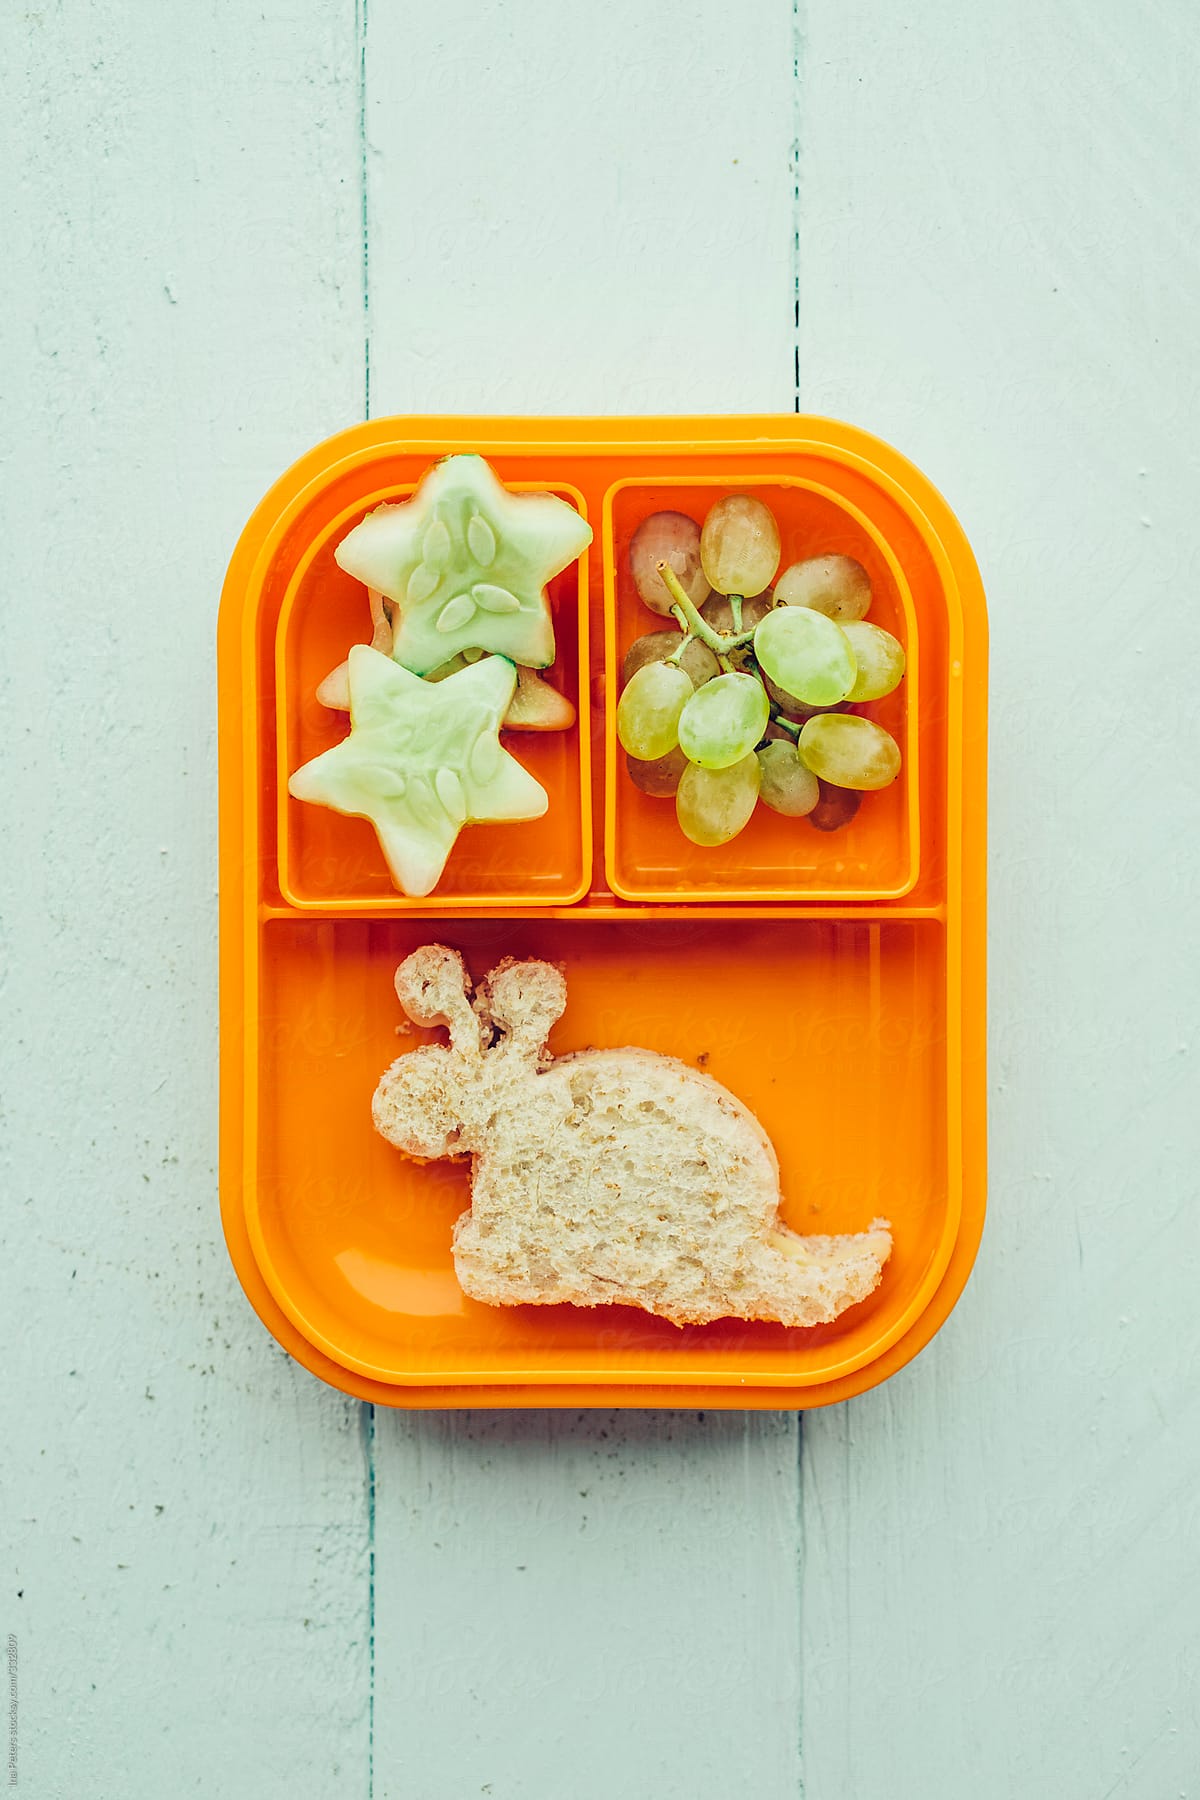 Food: Childrens\' school snack, snail-shaped sandwich with cheese and tomato, star-shaped cucumber and grapes